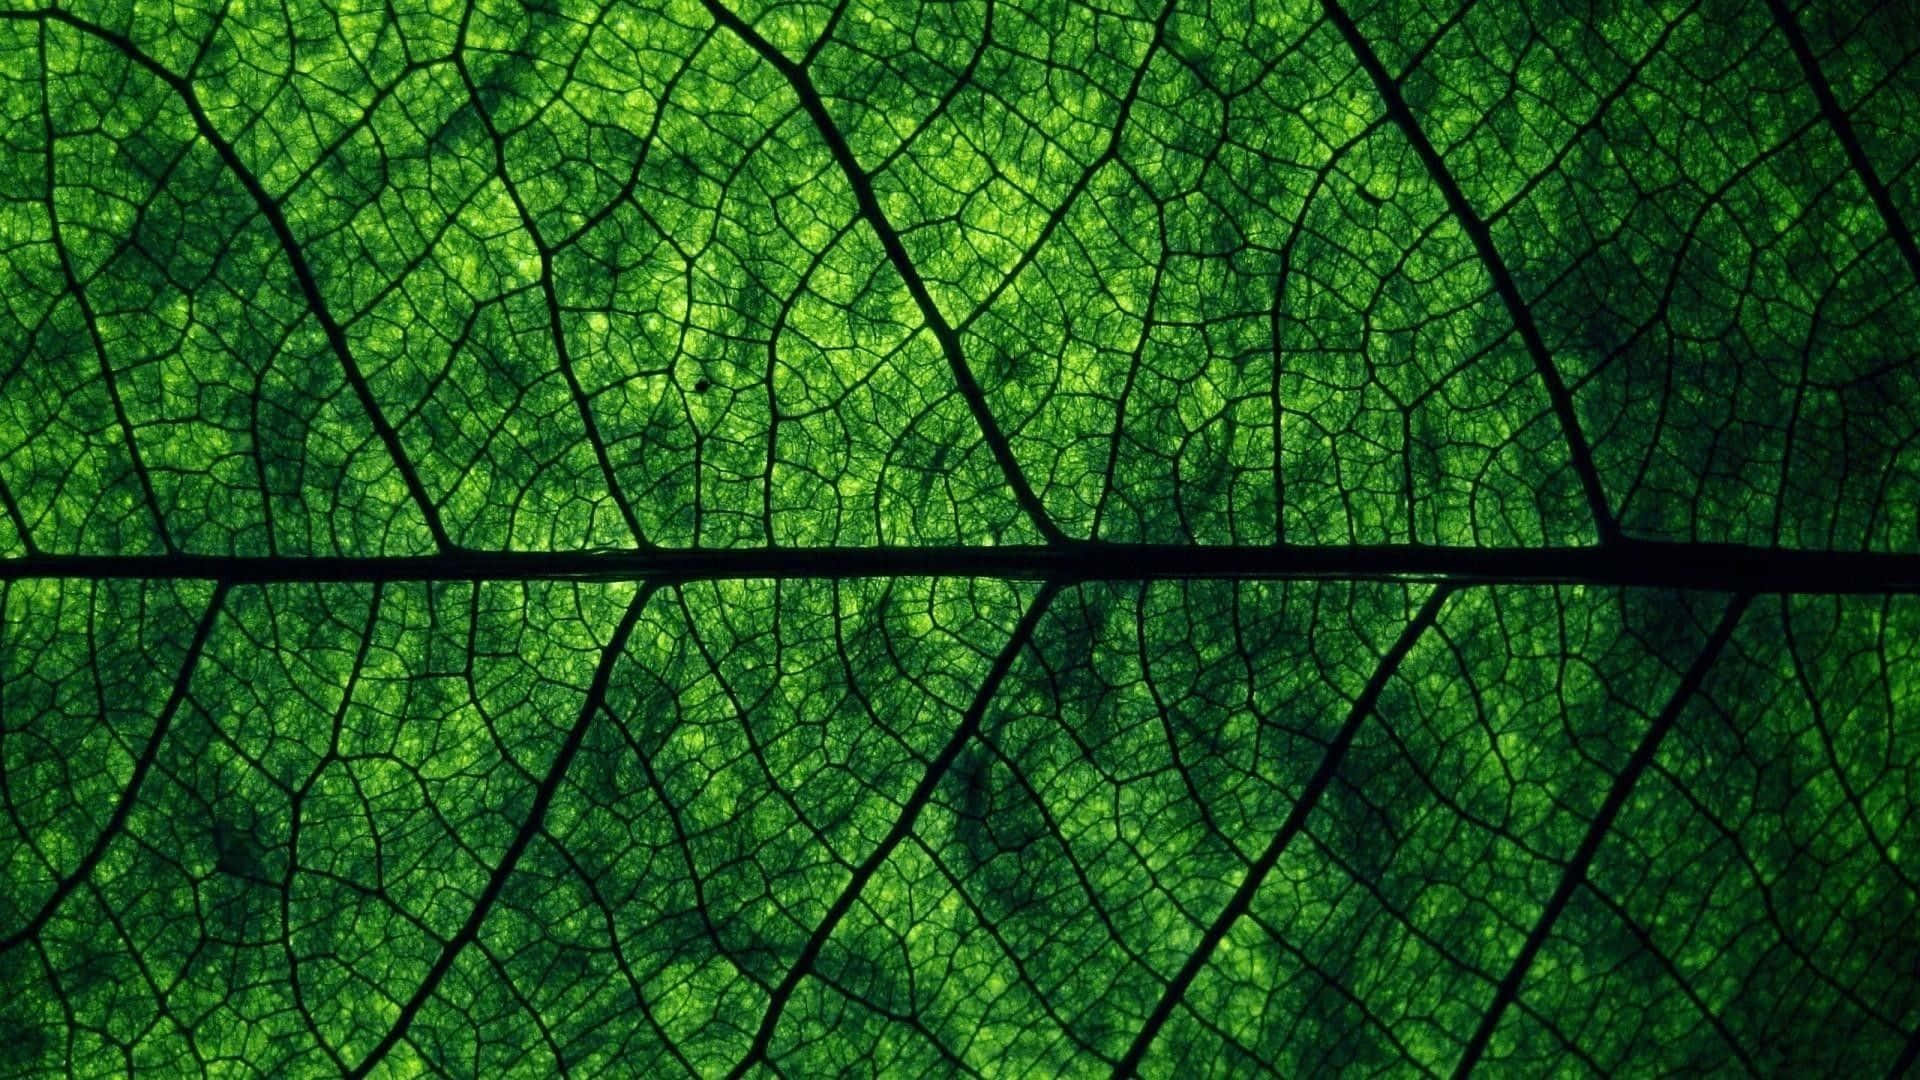 Aesthetic Green Leaf Pattern Pictures 1920 x 1080 Picture